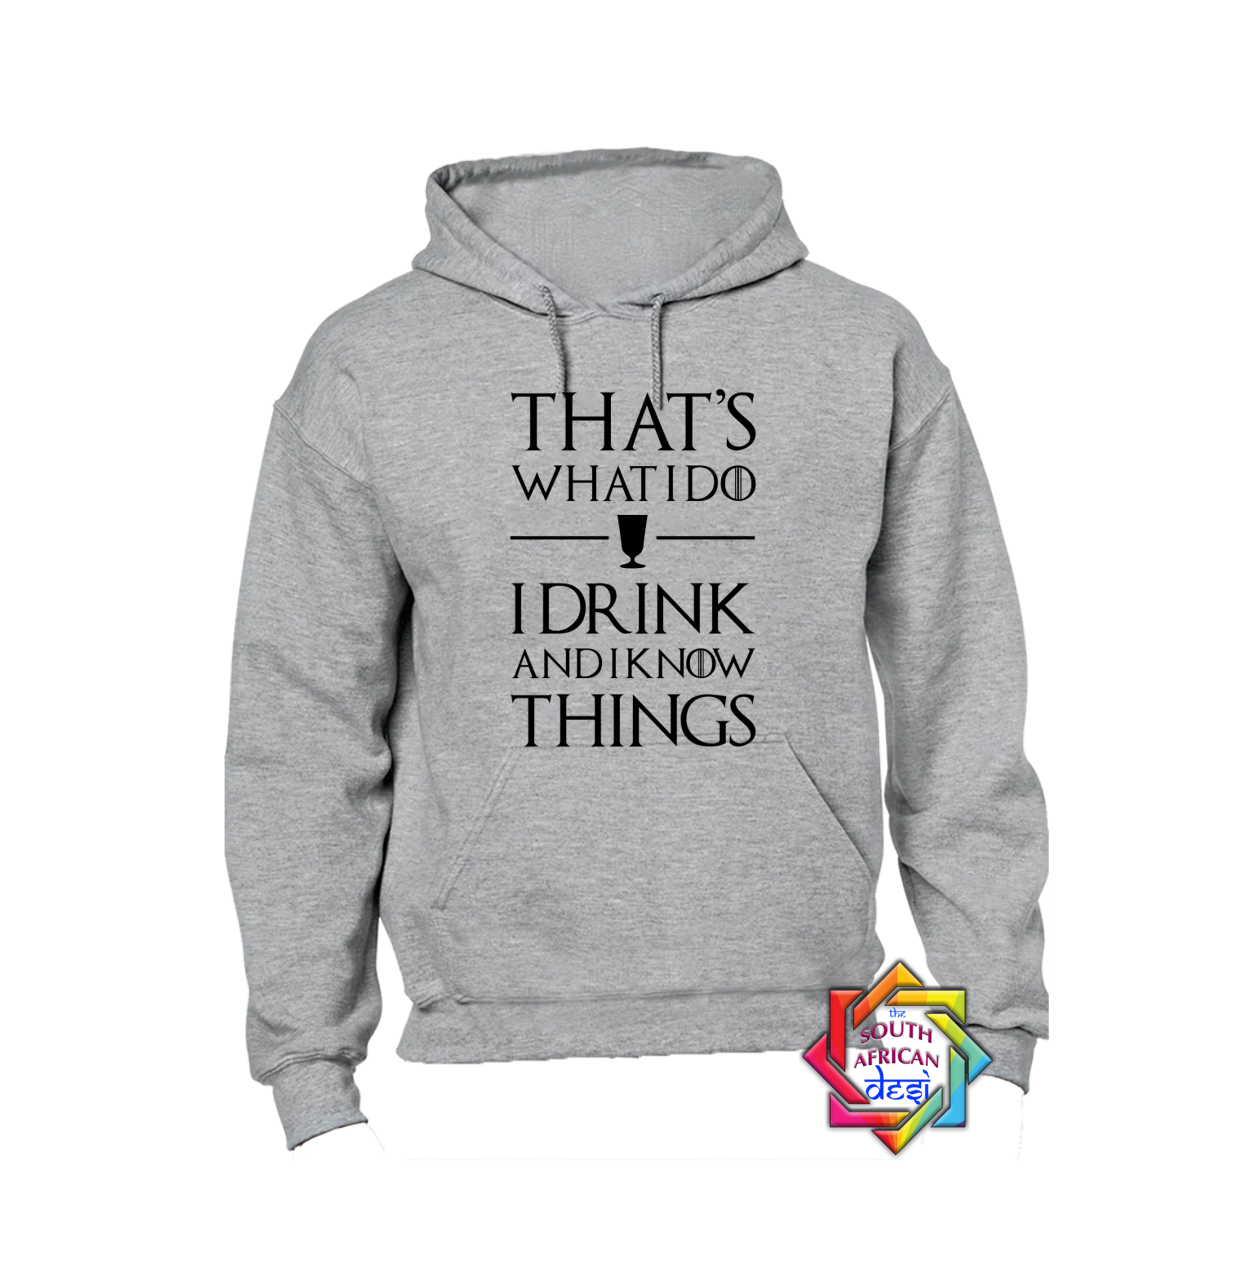 THAT'S WHAT I DO I DRINK & I KNOW THINGS | GAME OF THRONES INSPIRED | HOODIE/SWEATER | UNISEX